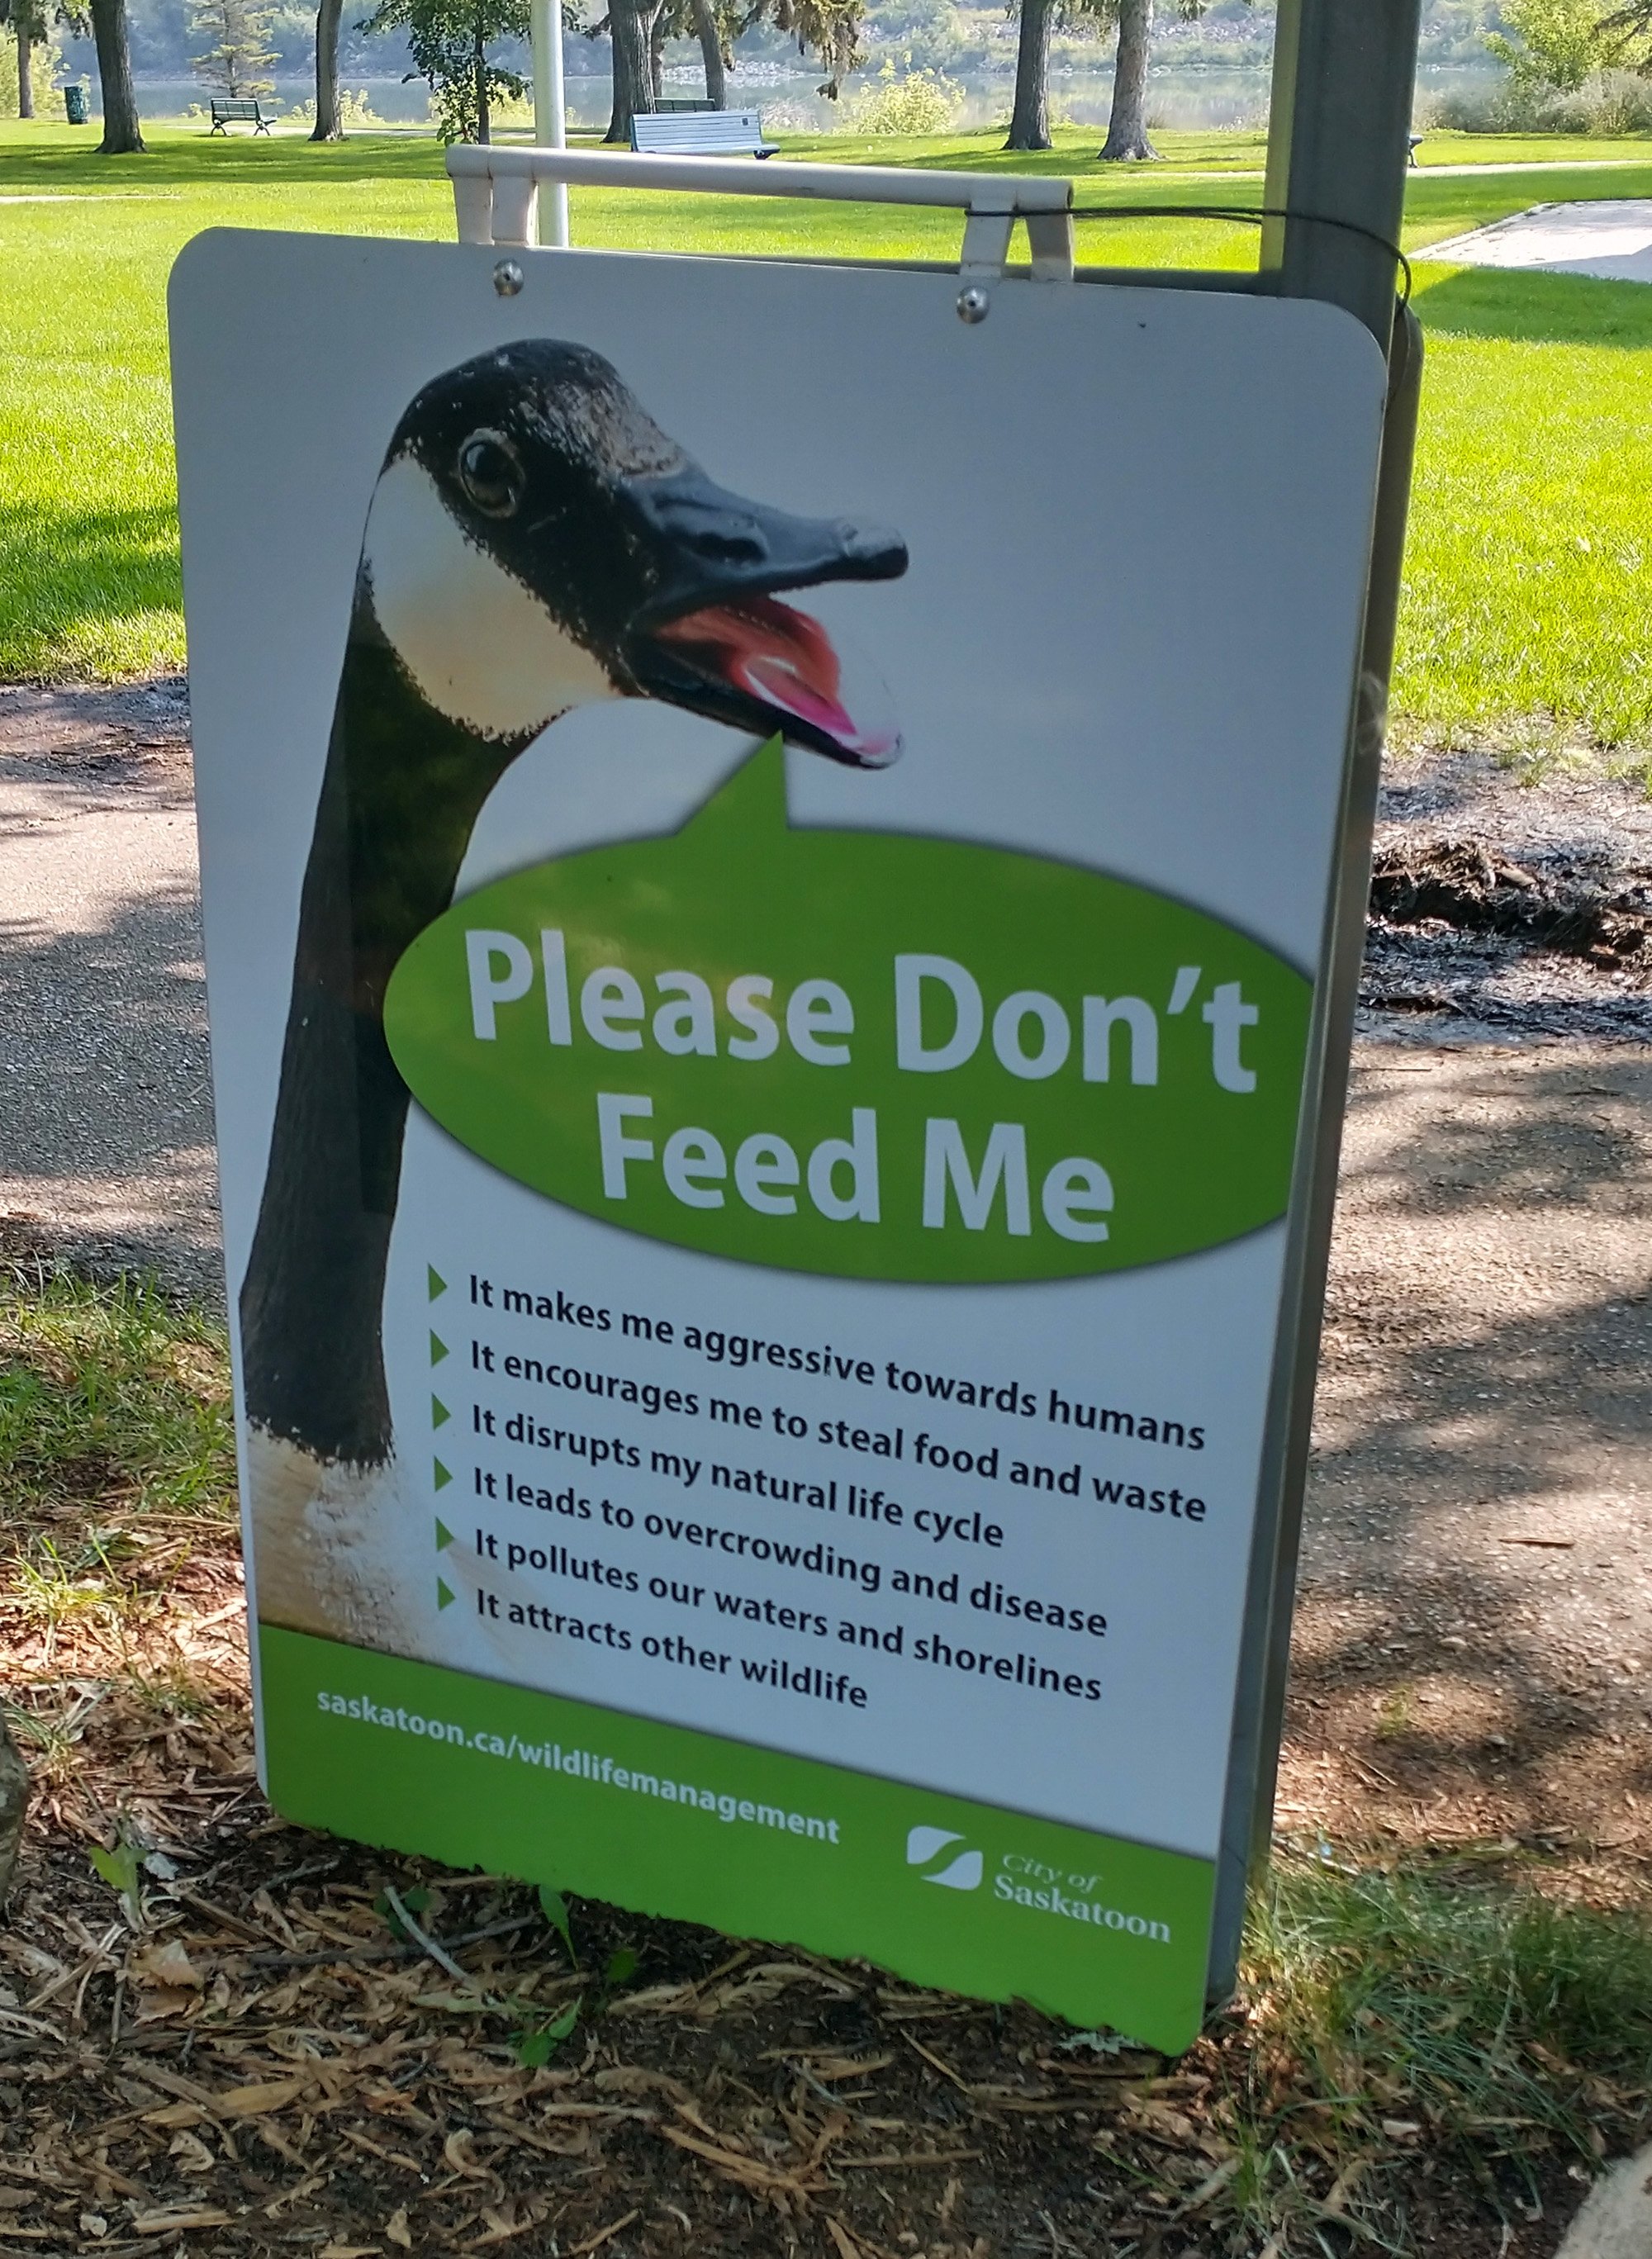 Don't feed them, eat them.